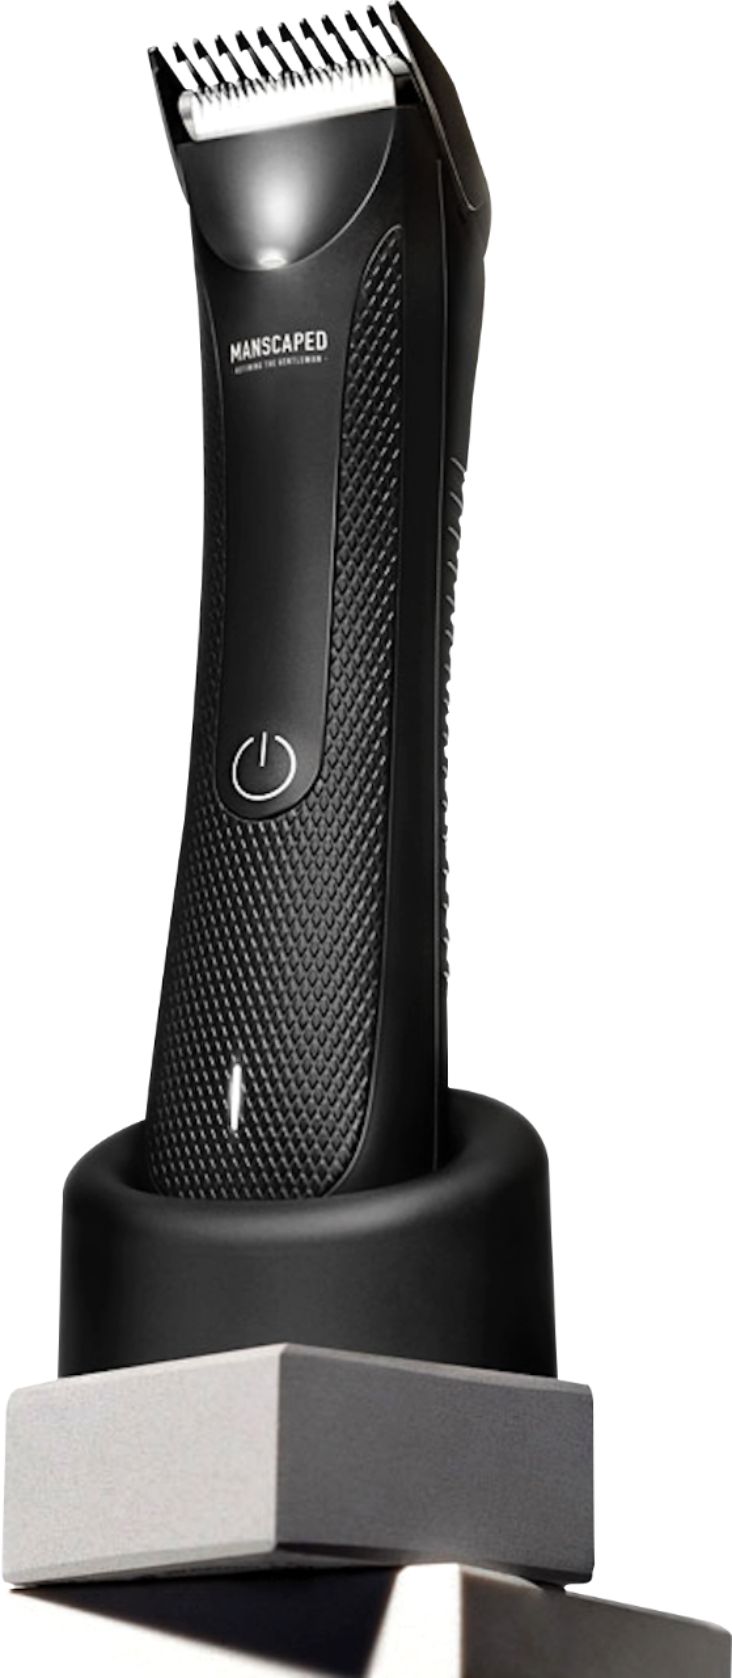 Left View: Wahl Lithium Ion Rechargeable All-in-One Trimmer - Black/Silver Model 9888-600